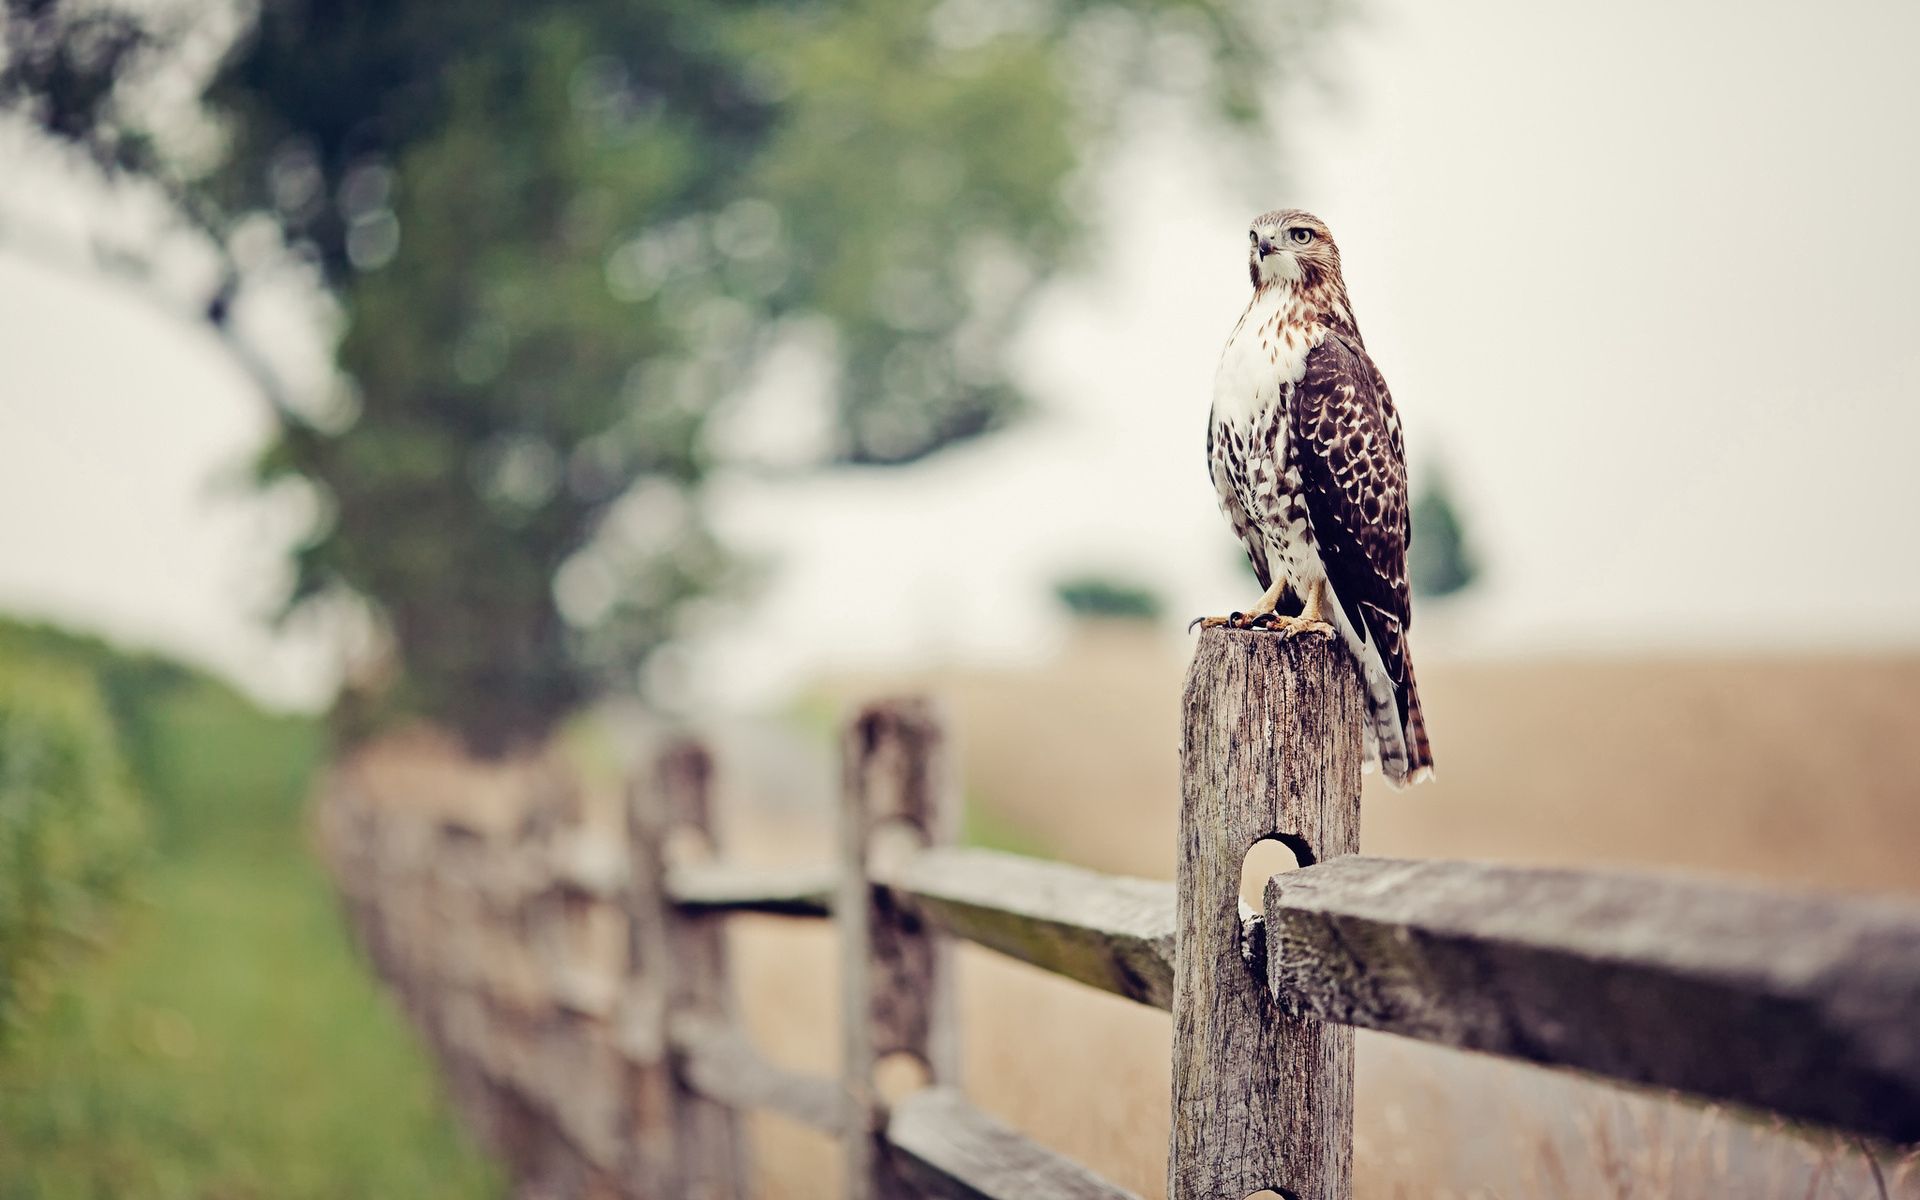 Falcon Photos, Download The BEST Free Falcon Stock Photos & HD Images